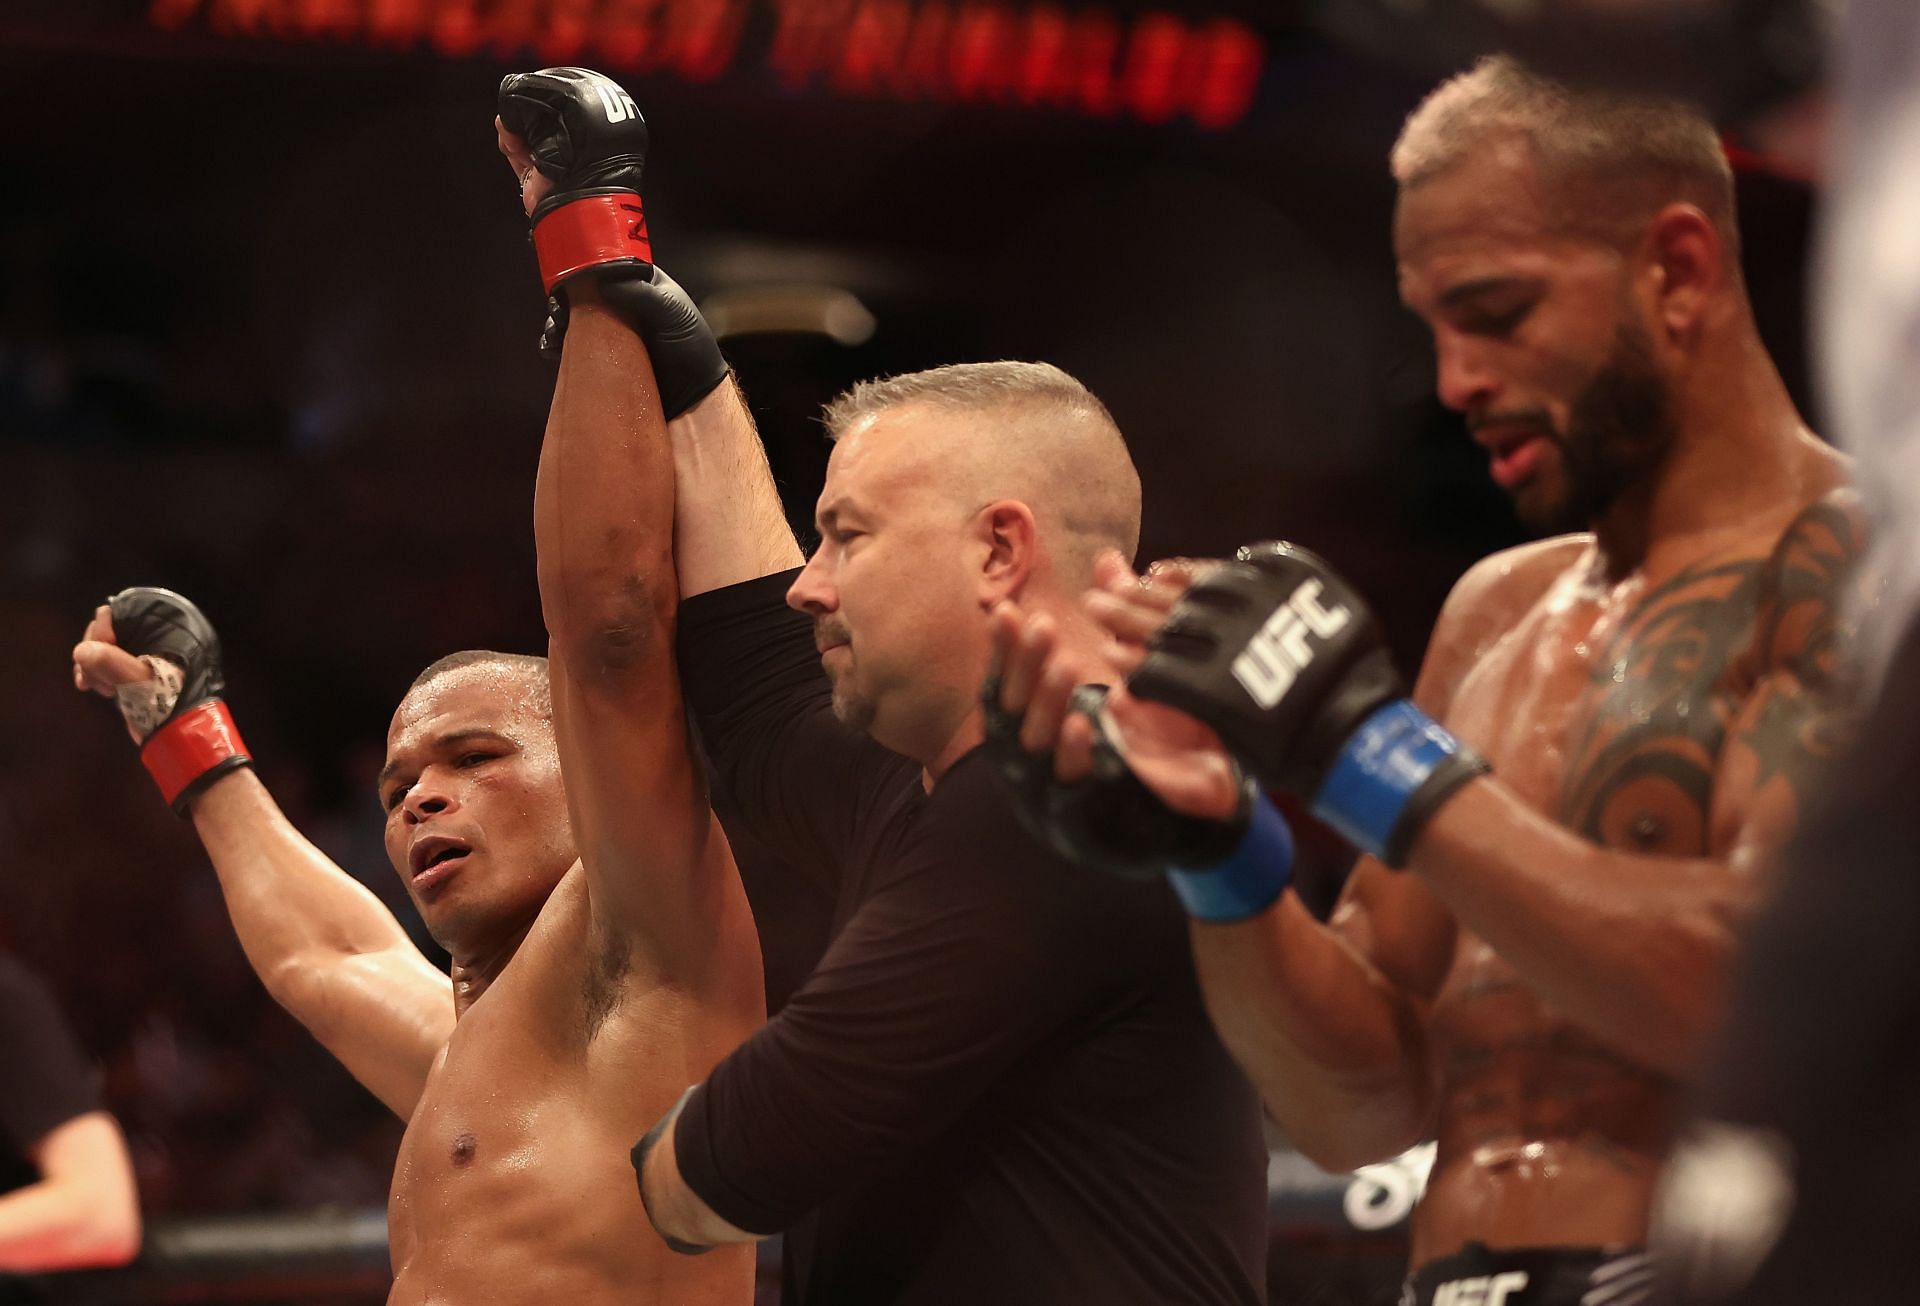 Francisco Trinaldo continues to win in the octagon despite being 43 years old